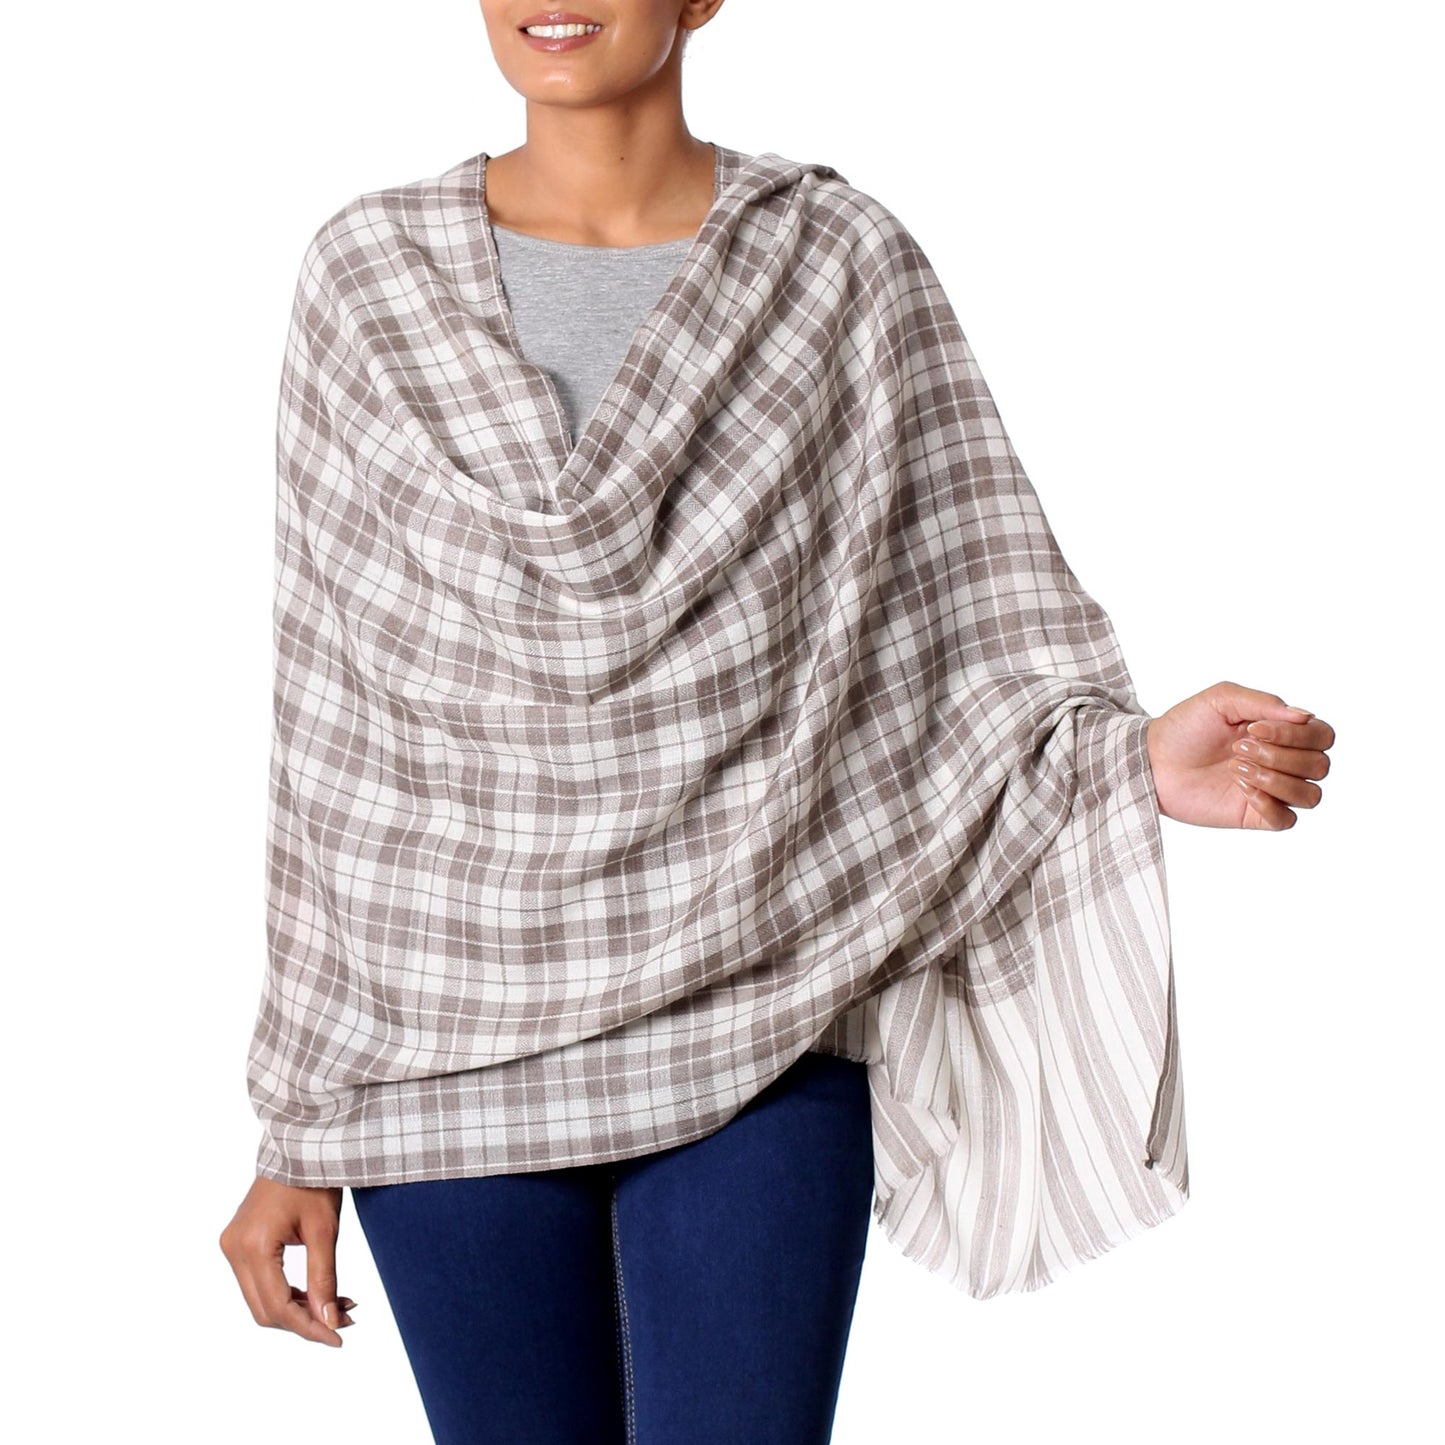 Salient Paths Wool Shawl from India Grey Checkered Pattern over Cream